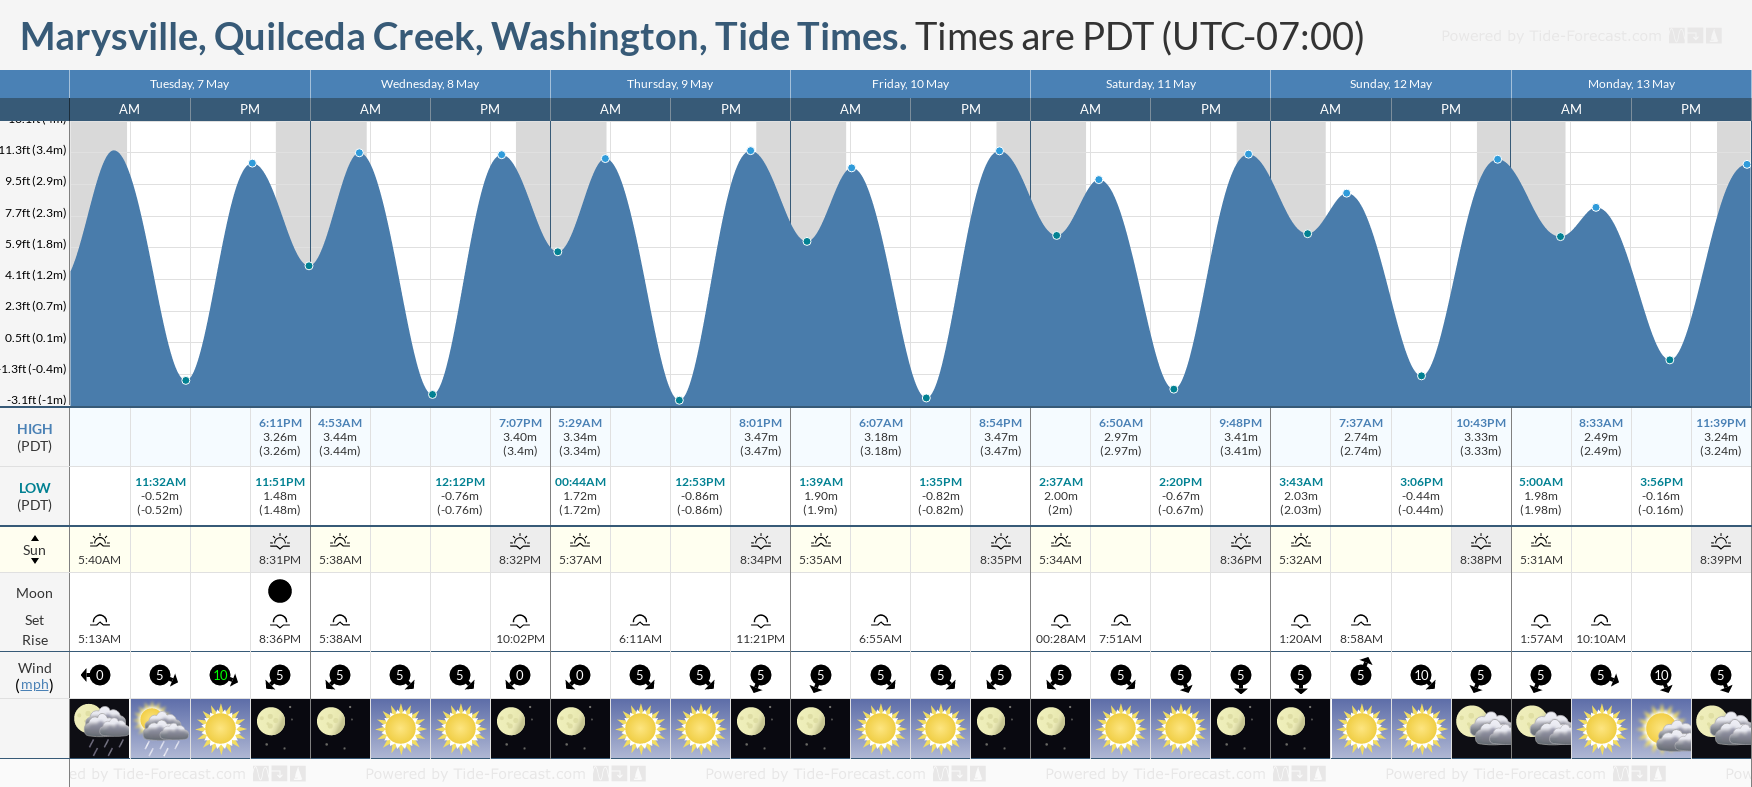 Marysville, Quilceda Creek, Washington Tide Chart including high and low tide tide times for the next 7 days